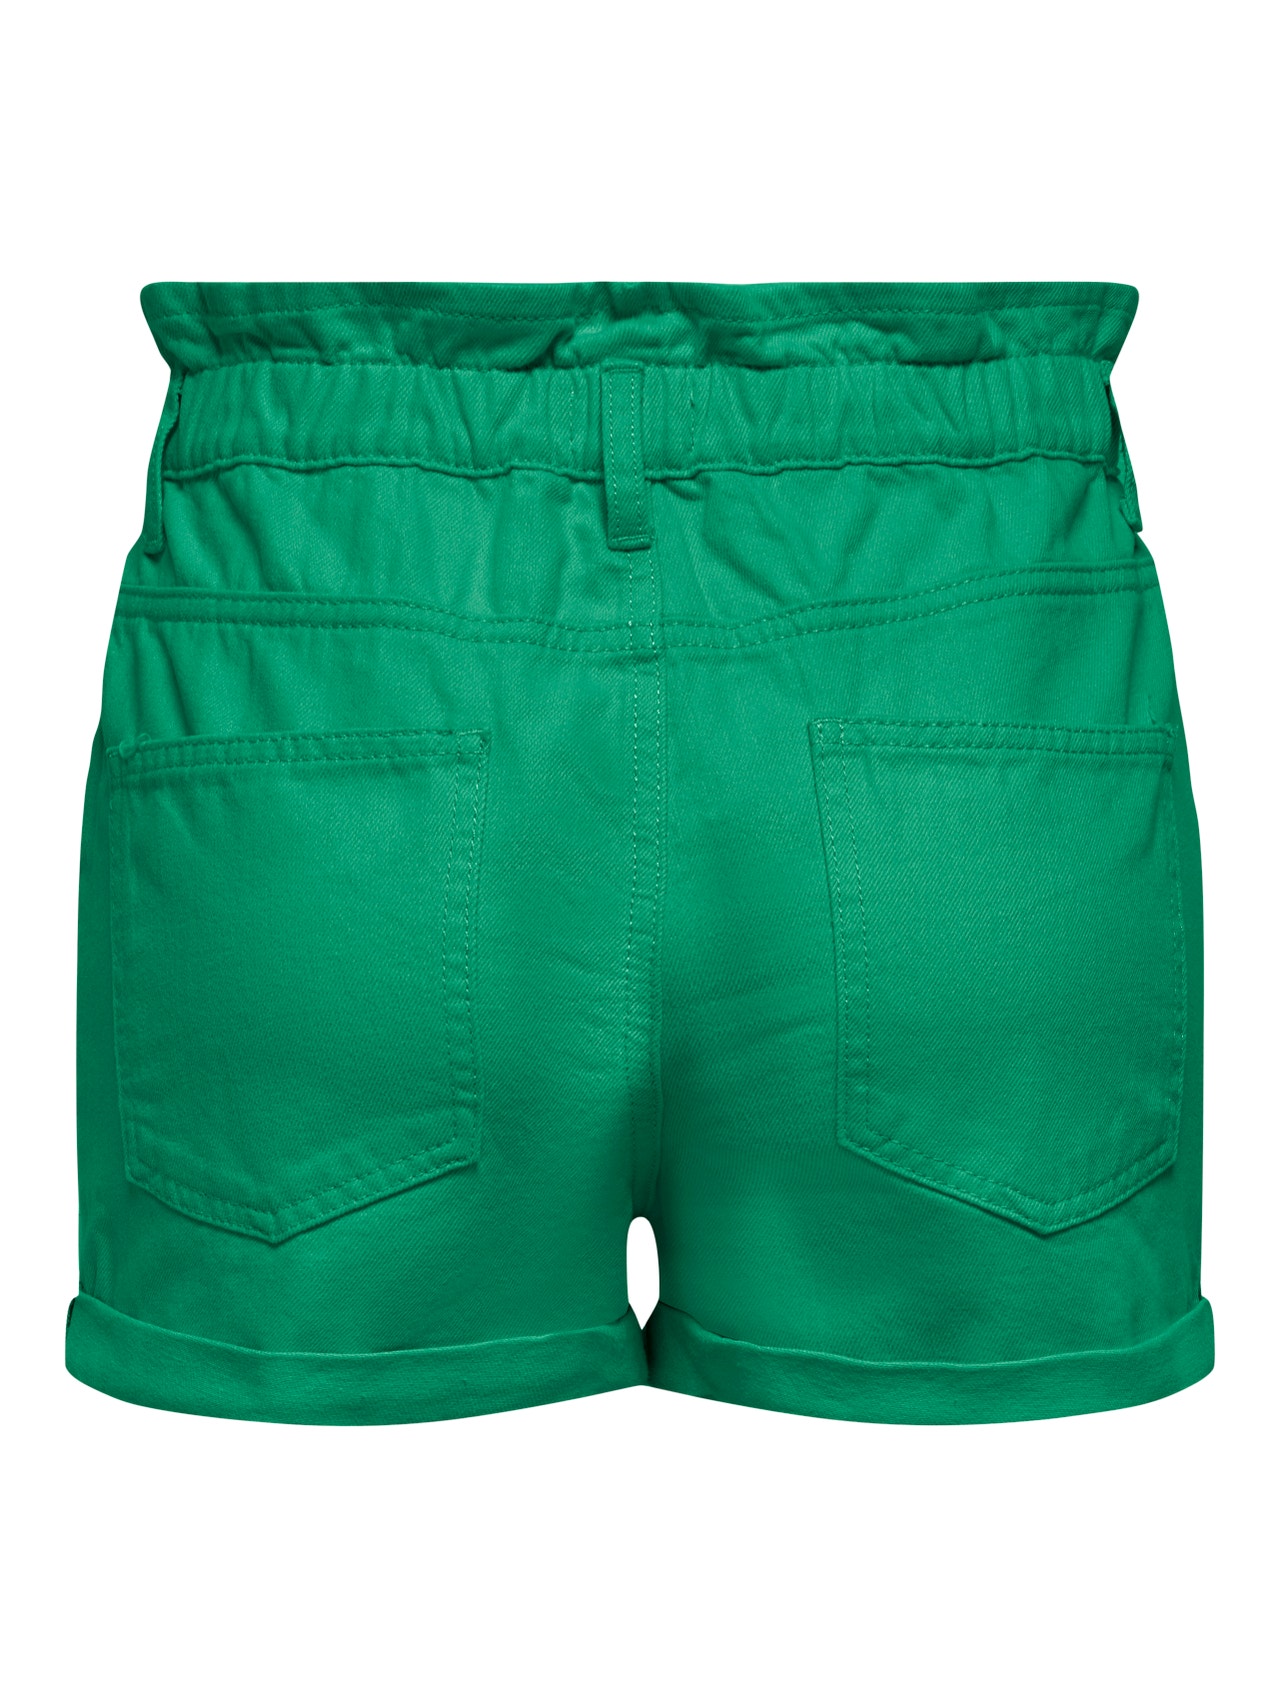 ONLY Paperbag Short -Simply Green - 15230253